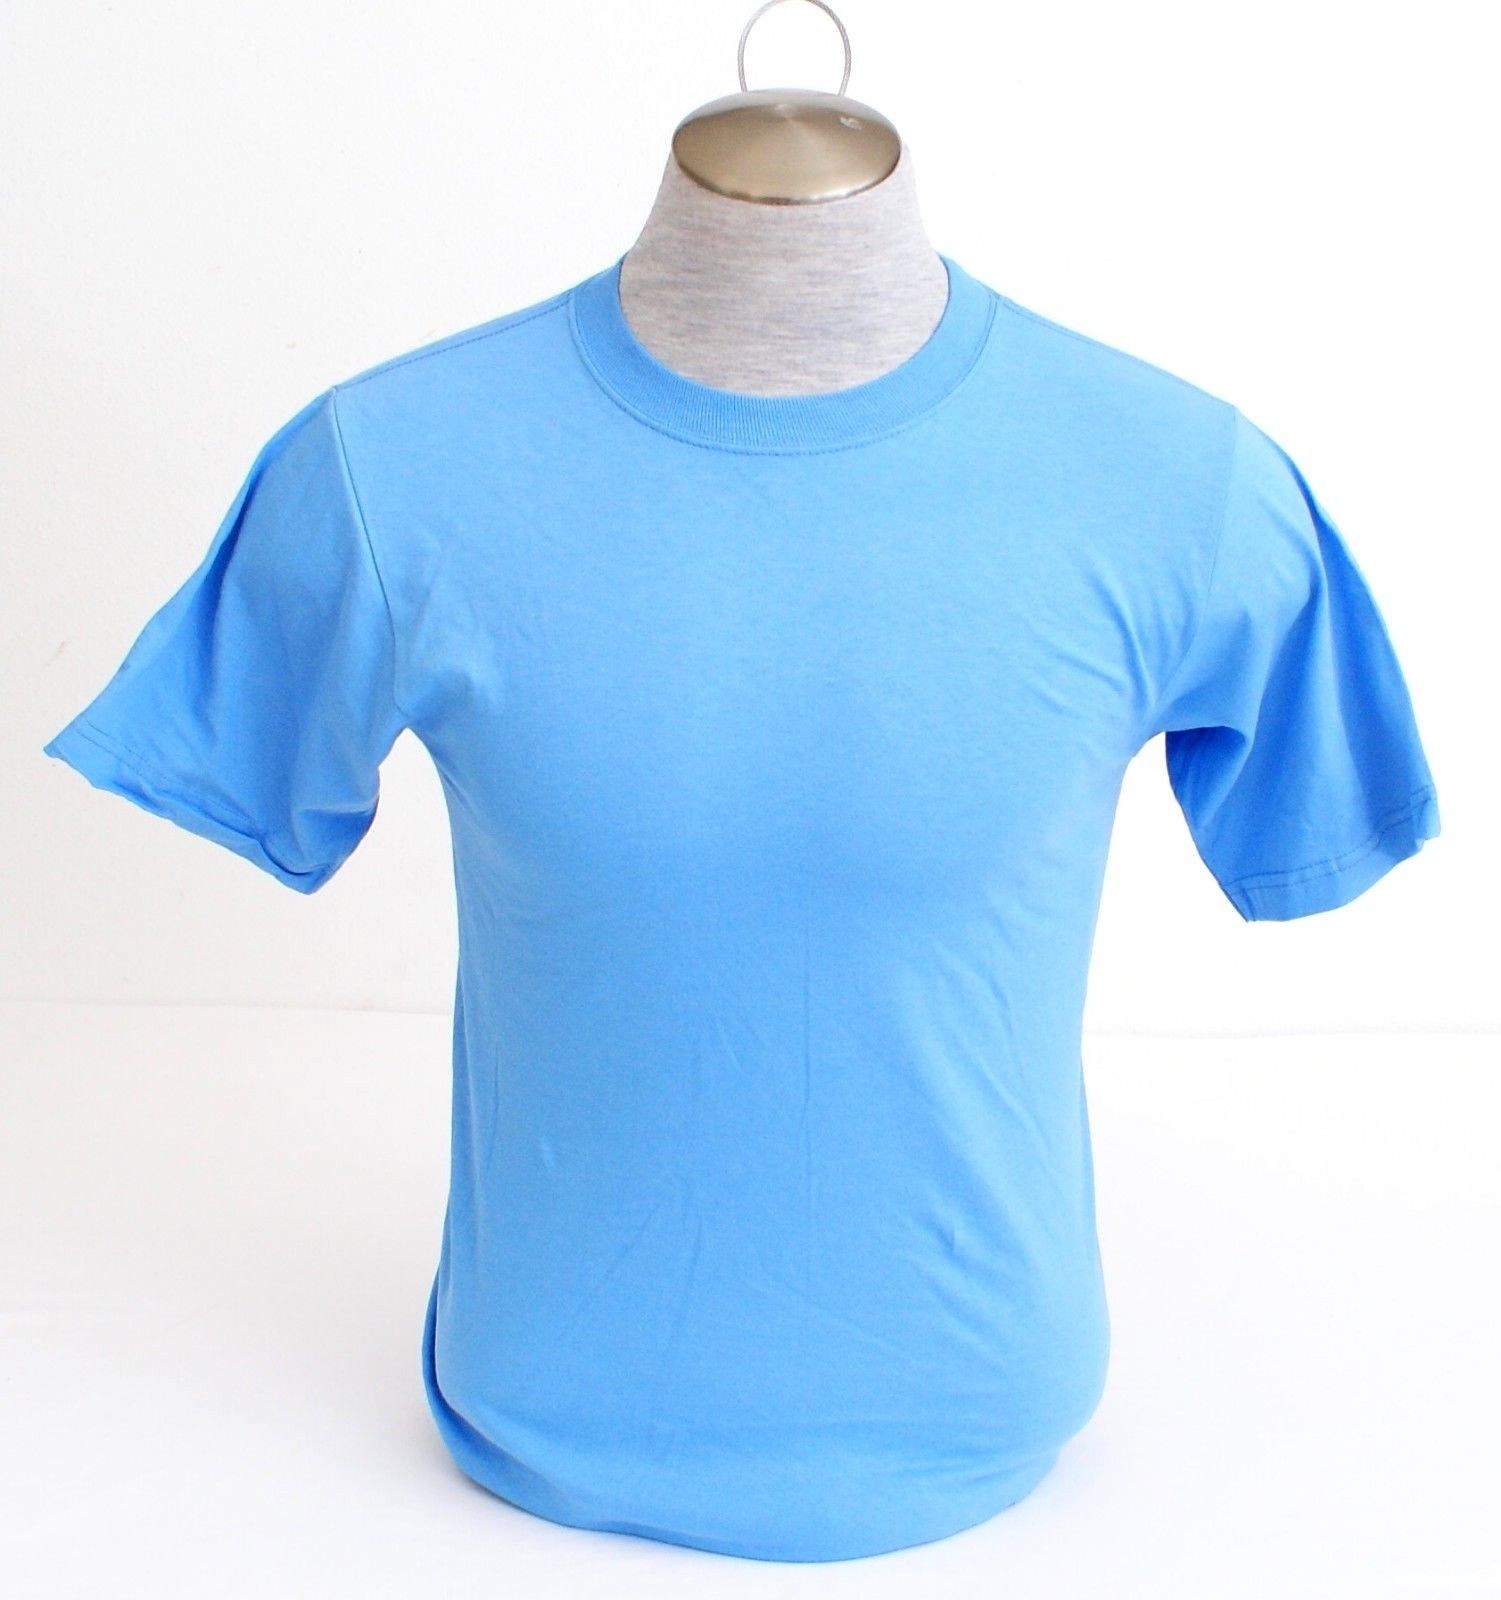 Primary image for Reebok Blue Crew Neck Cotton Tee T Shirt Men's NEW